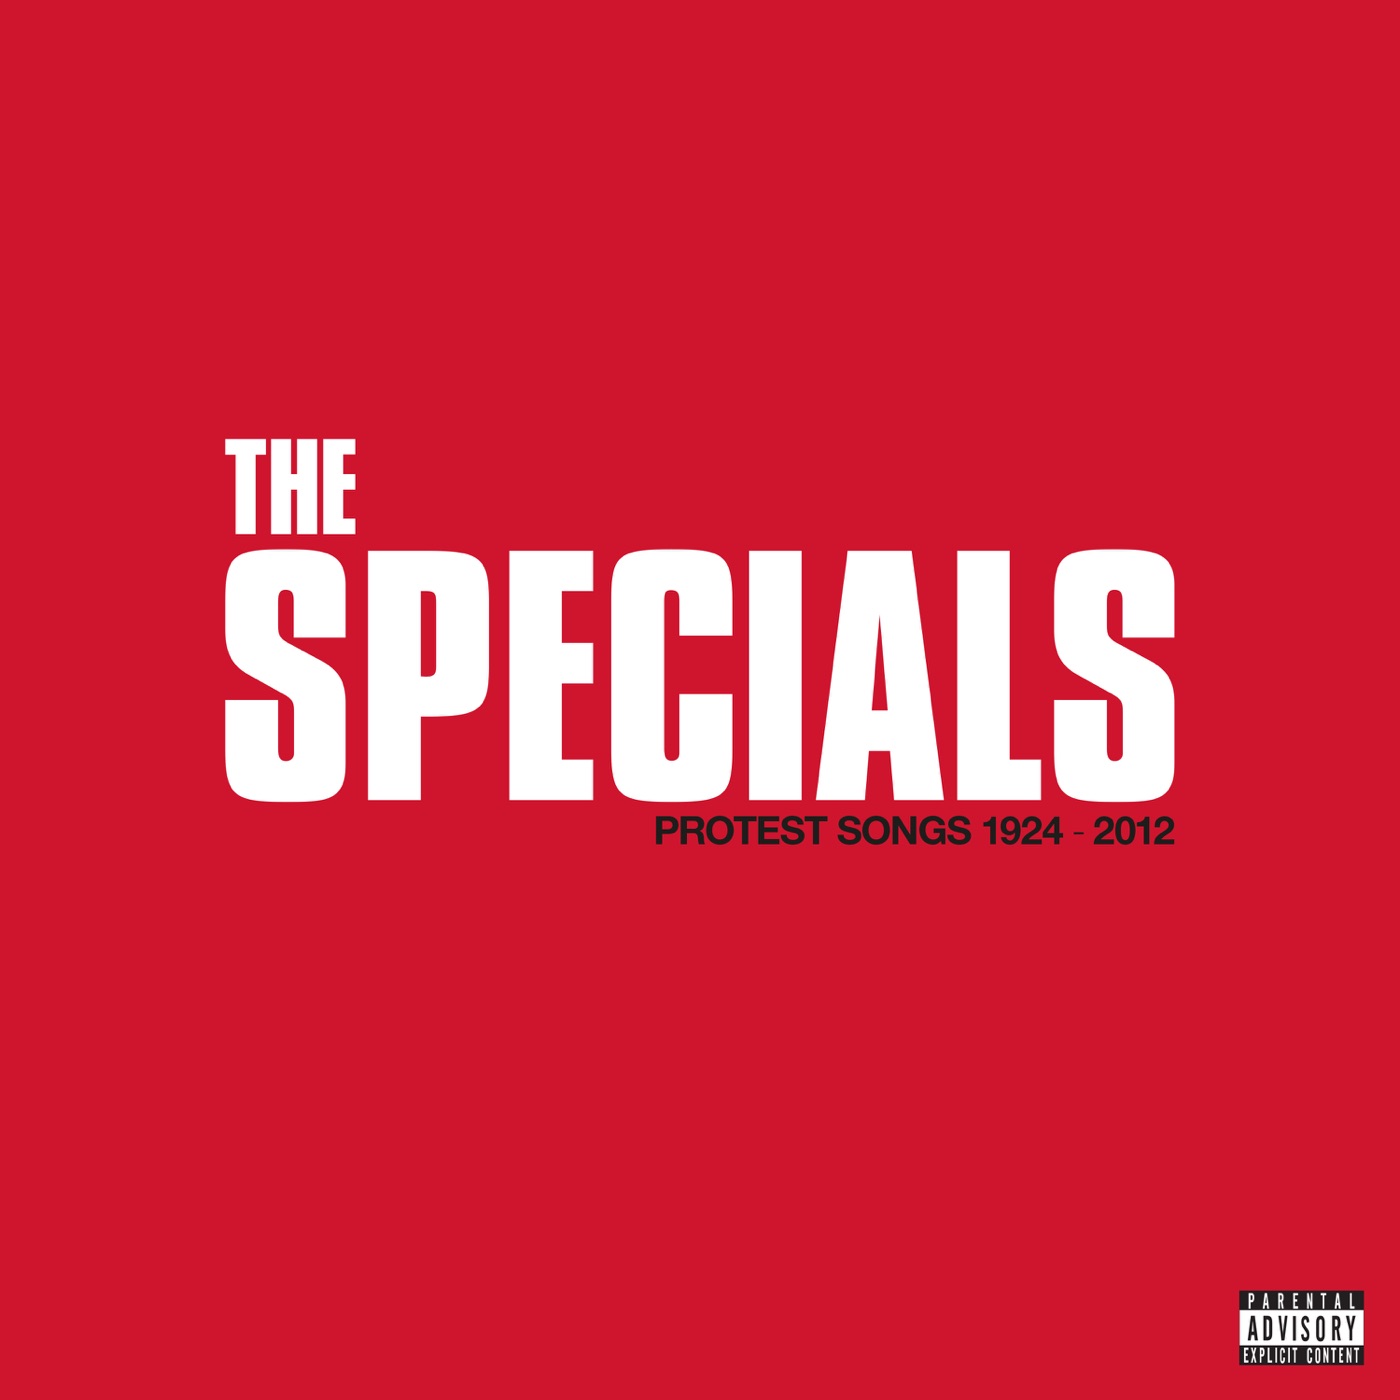 Protest Songs 1924 – 2012 by The Specials